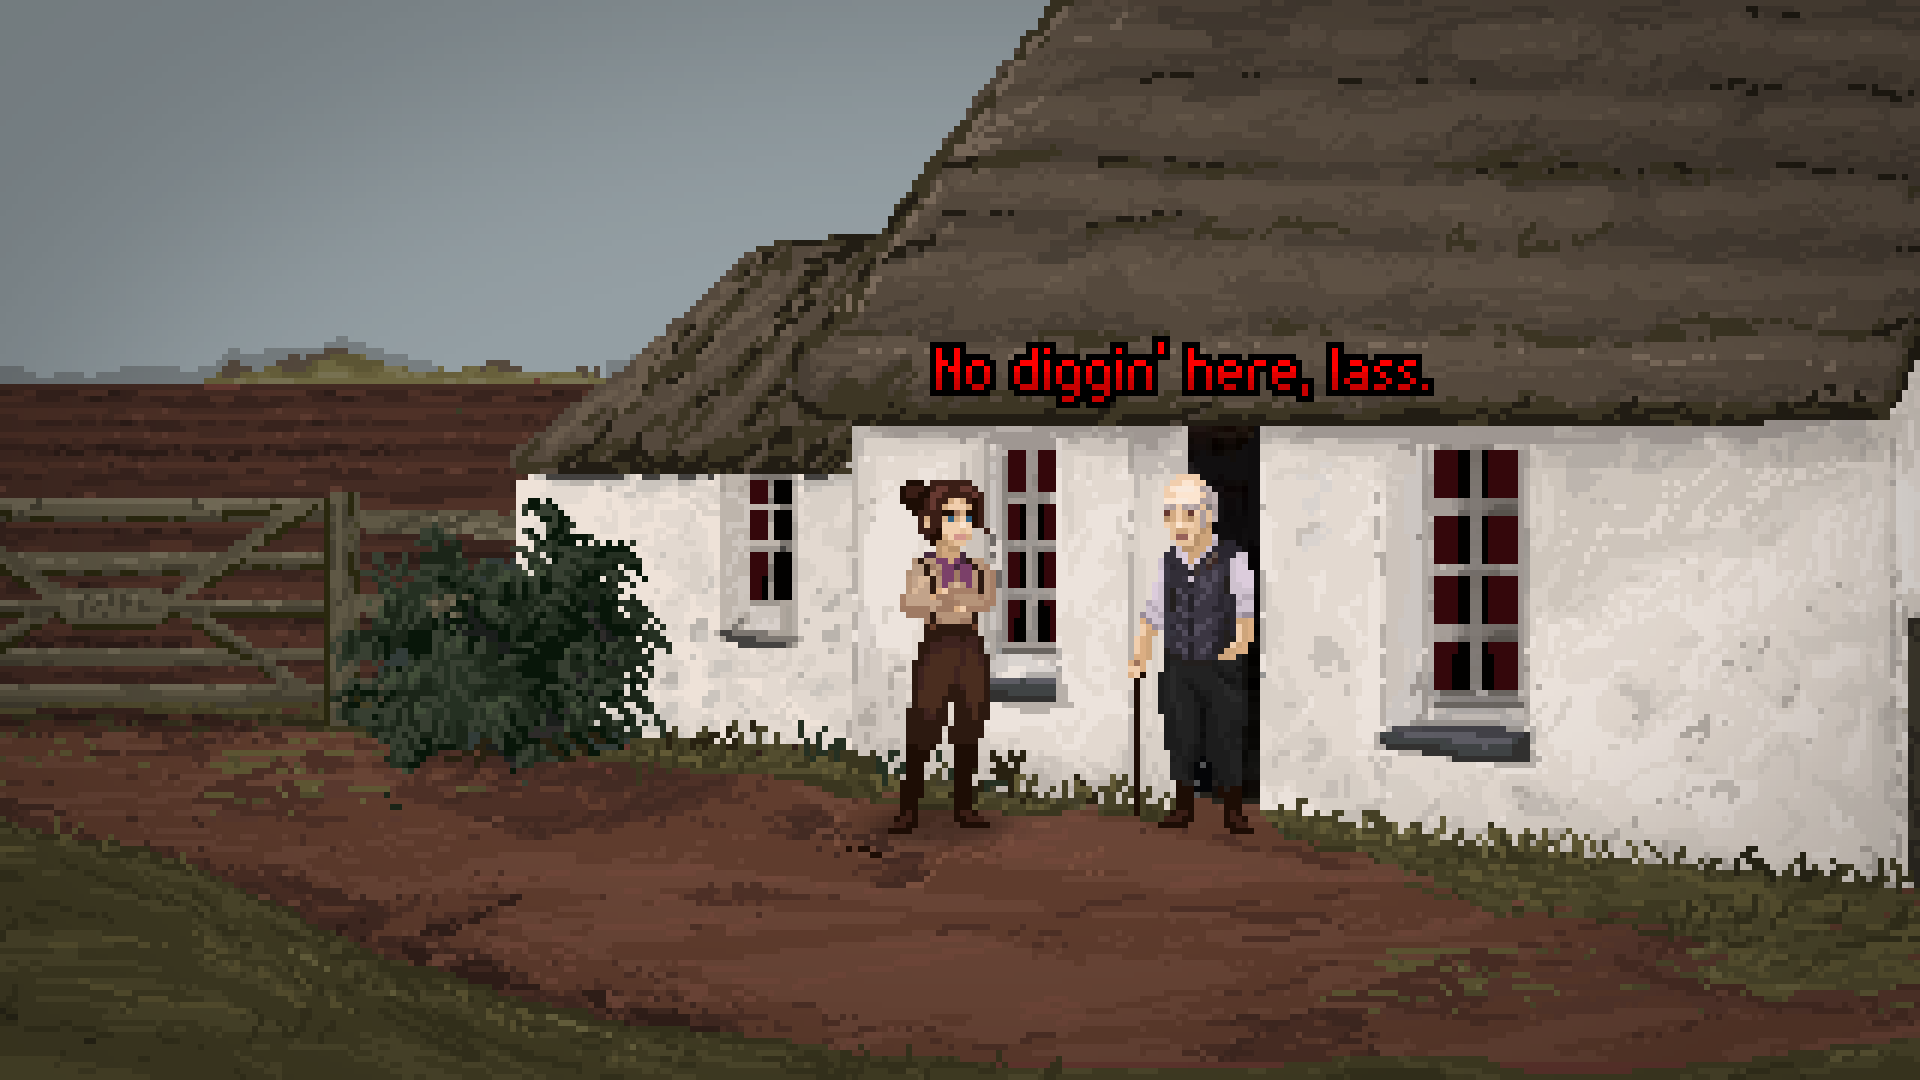 A woman converses with an old man outside a hut in the excavations of Hobbs Barrow.